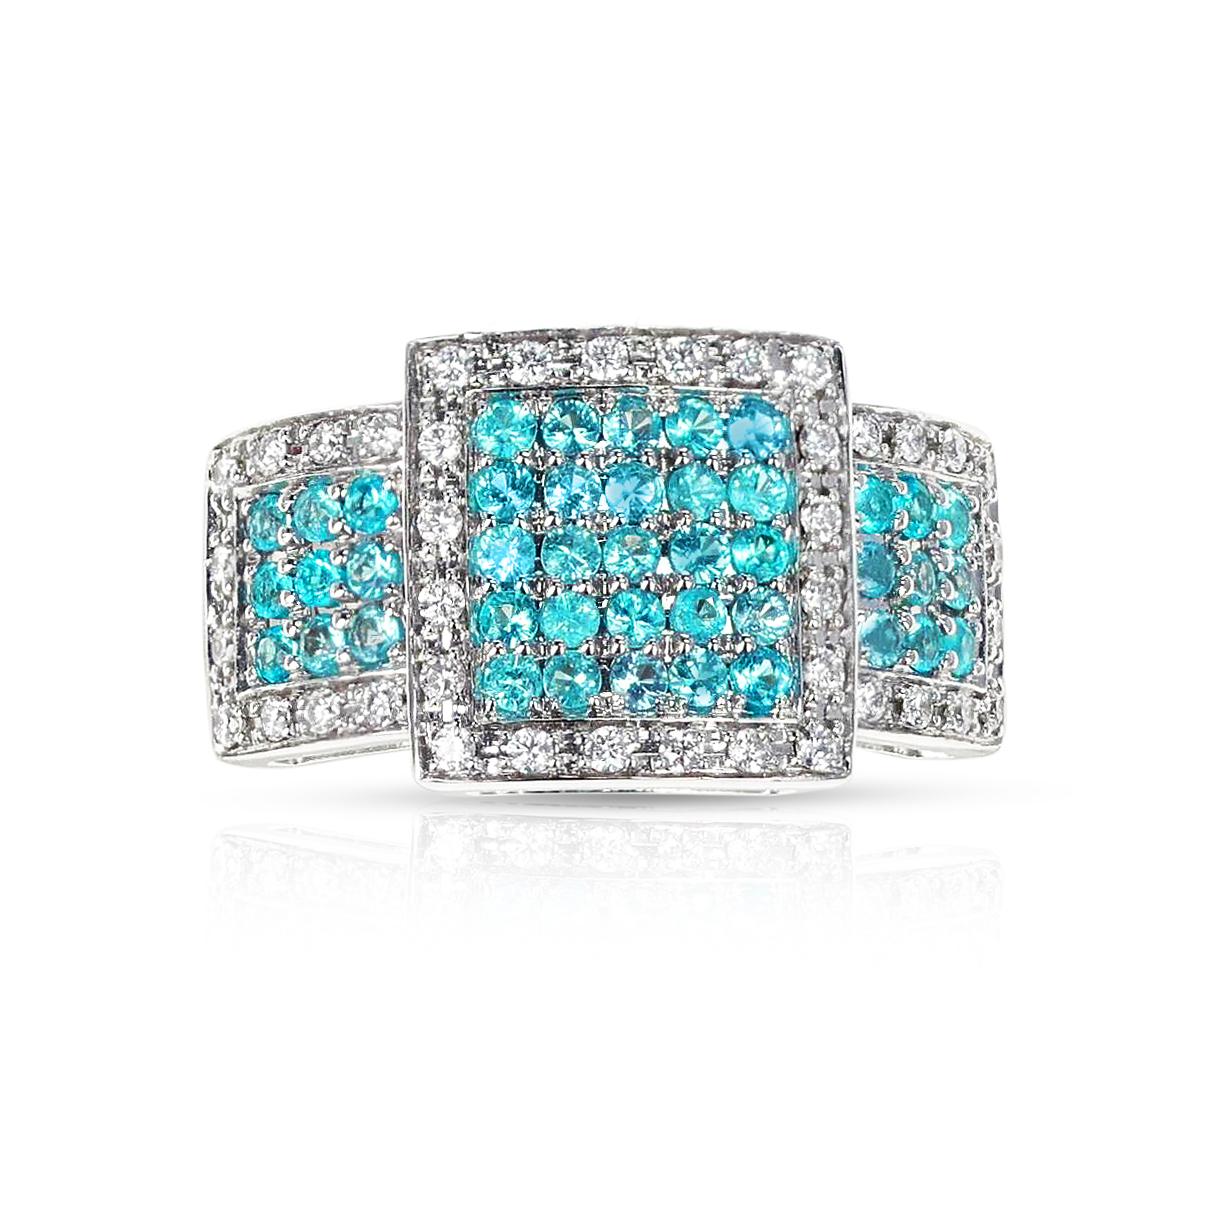 A Three Square Cocktail Brazilian Paraiba and Diamond Ring made in 18 Karat White Gold. The Brazilian Paraiba Tourmaline weighs 0.61 cts, the Diamonds weigh 0.30 cts. The total weight of the ring is 9.88 grams. The ring size is 6.50 US. 



